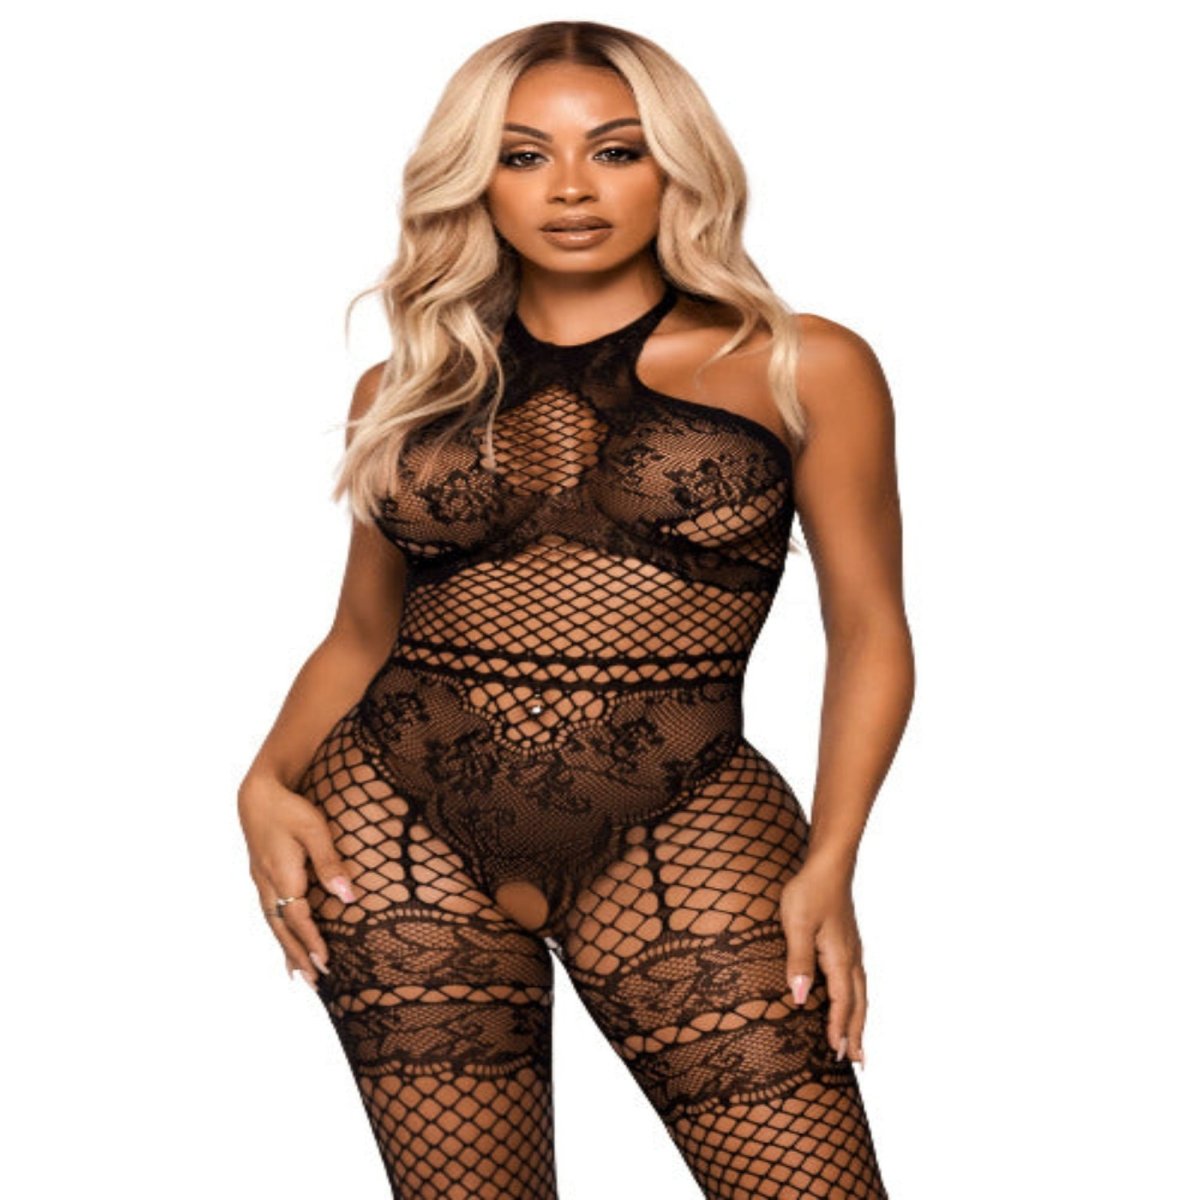 All About You Bodystocking - worldclasscostumes